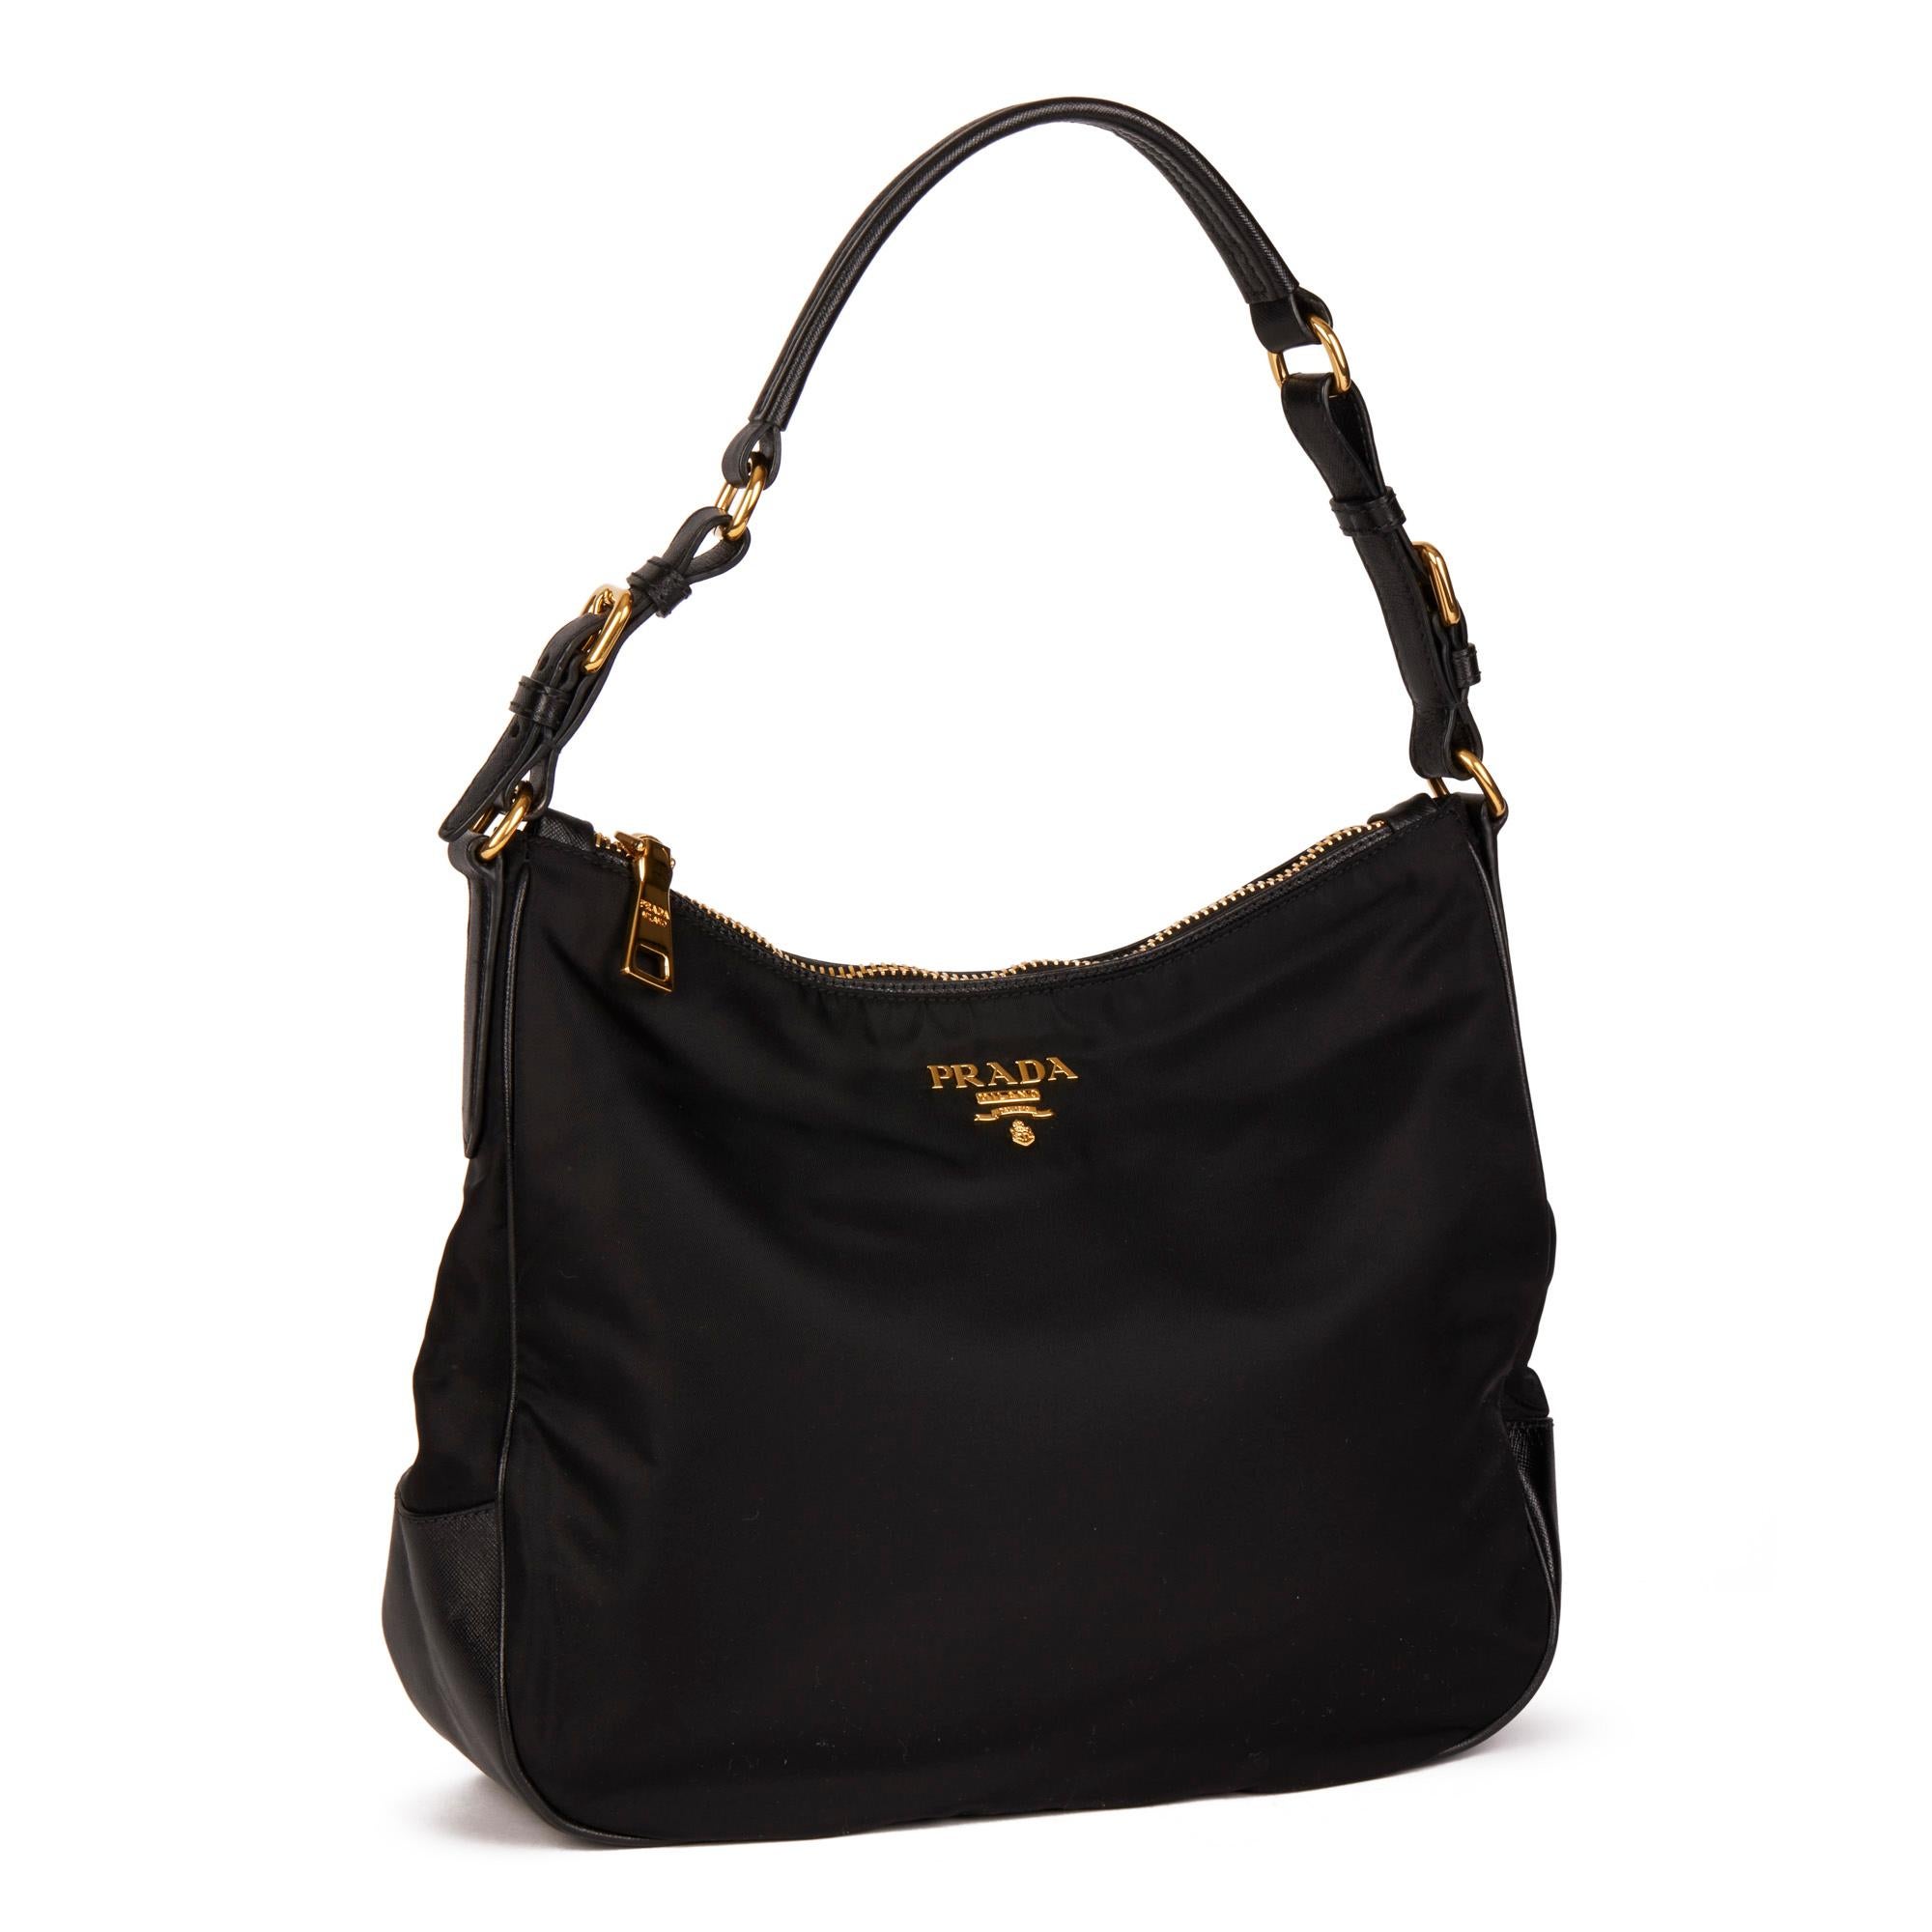 PRADA
Black Nylon & Black Saffiano Leather Top Handle Bag

Xupes Reference: CB561
Serial Number: 164
Age (Circa): 2000
Accompanied By: Prada Dust Bag, Authenticity Card, Luggage Tag
Authenticity Details: Date Stamp (Made in Italy)
Gender: